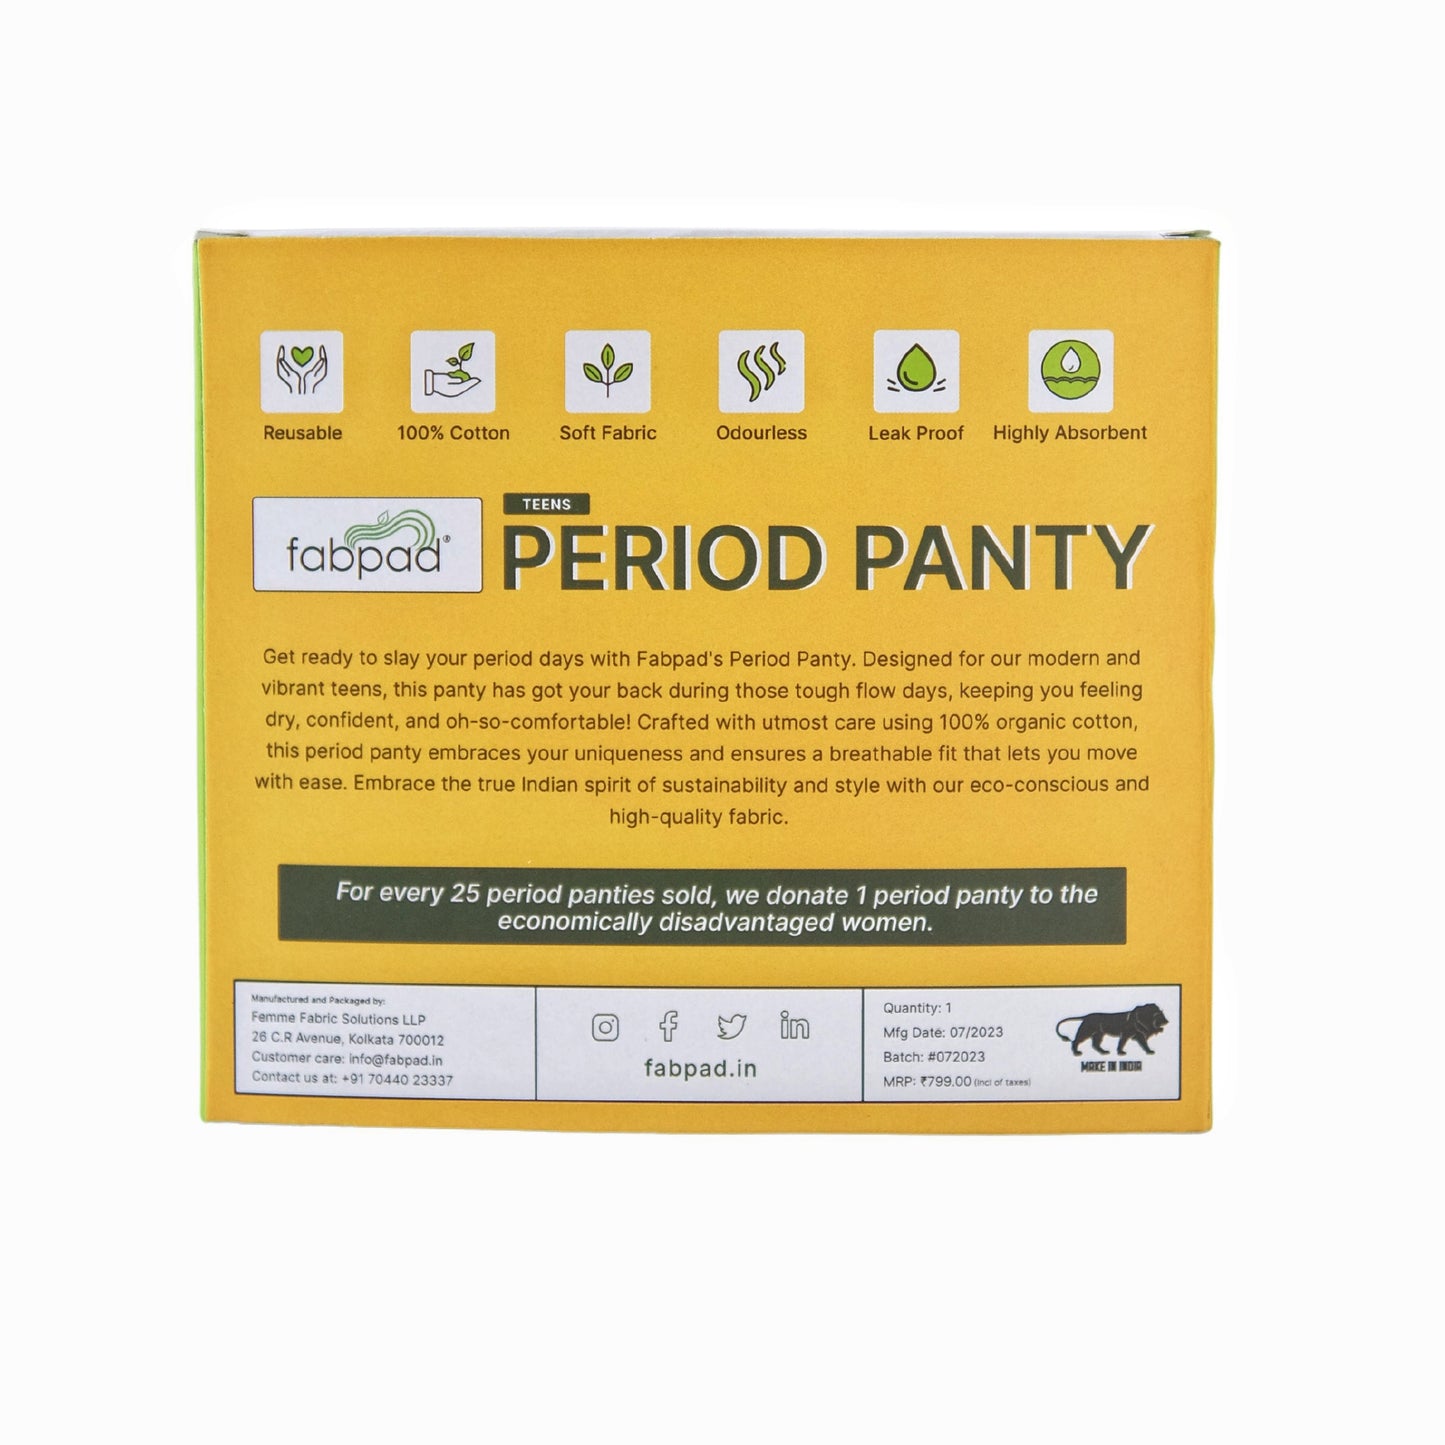 Fabpad Teen Girls Reusable Leak Proof Highly Absorbent Period Panties/Underwear lasts for up to 3 years